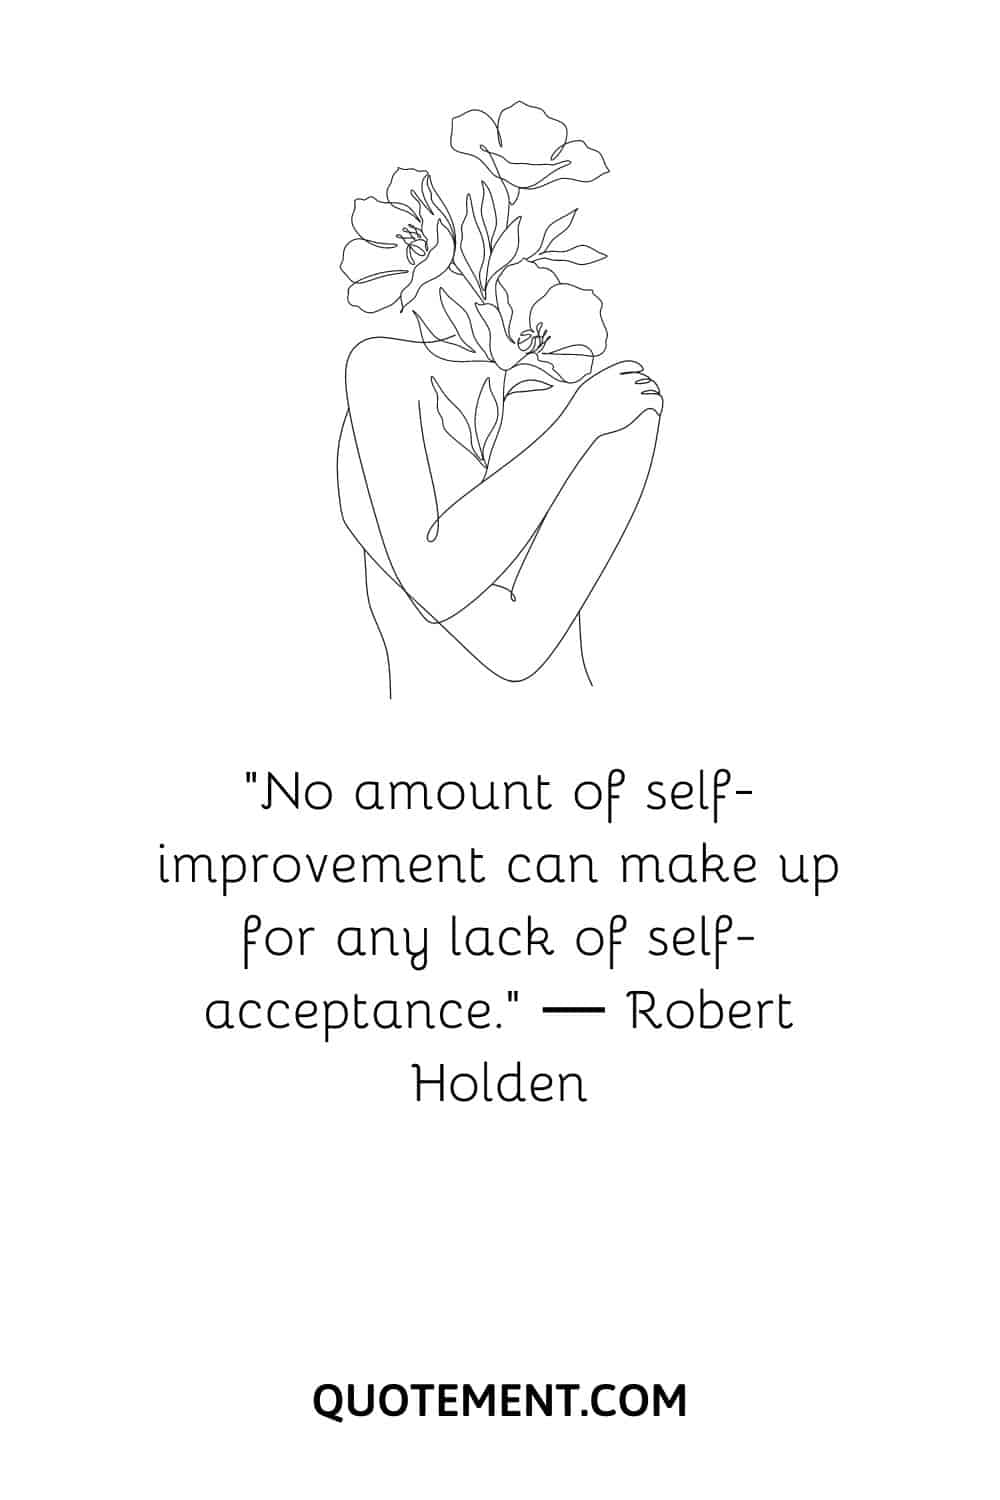 “No amount of self-improvement can make up for any lack of self-acceptance.” ― Robert Holden